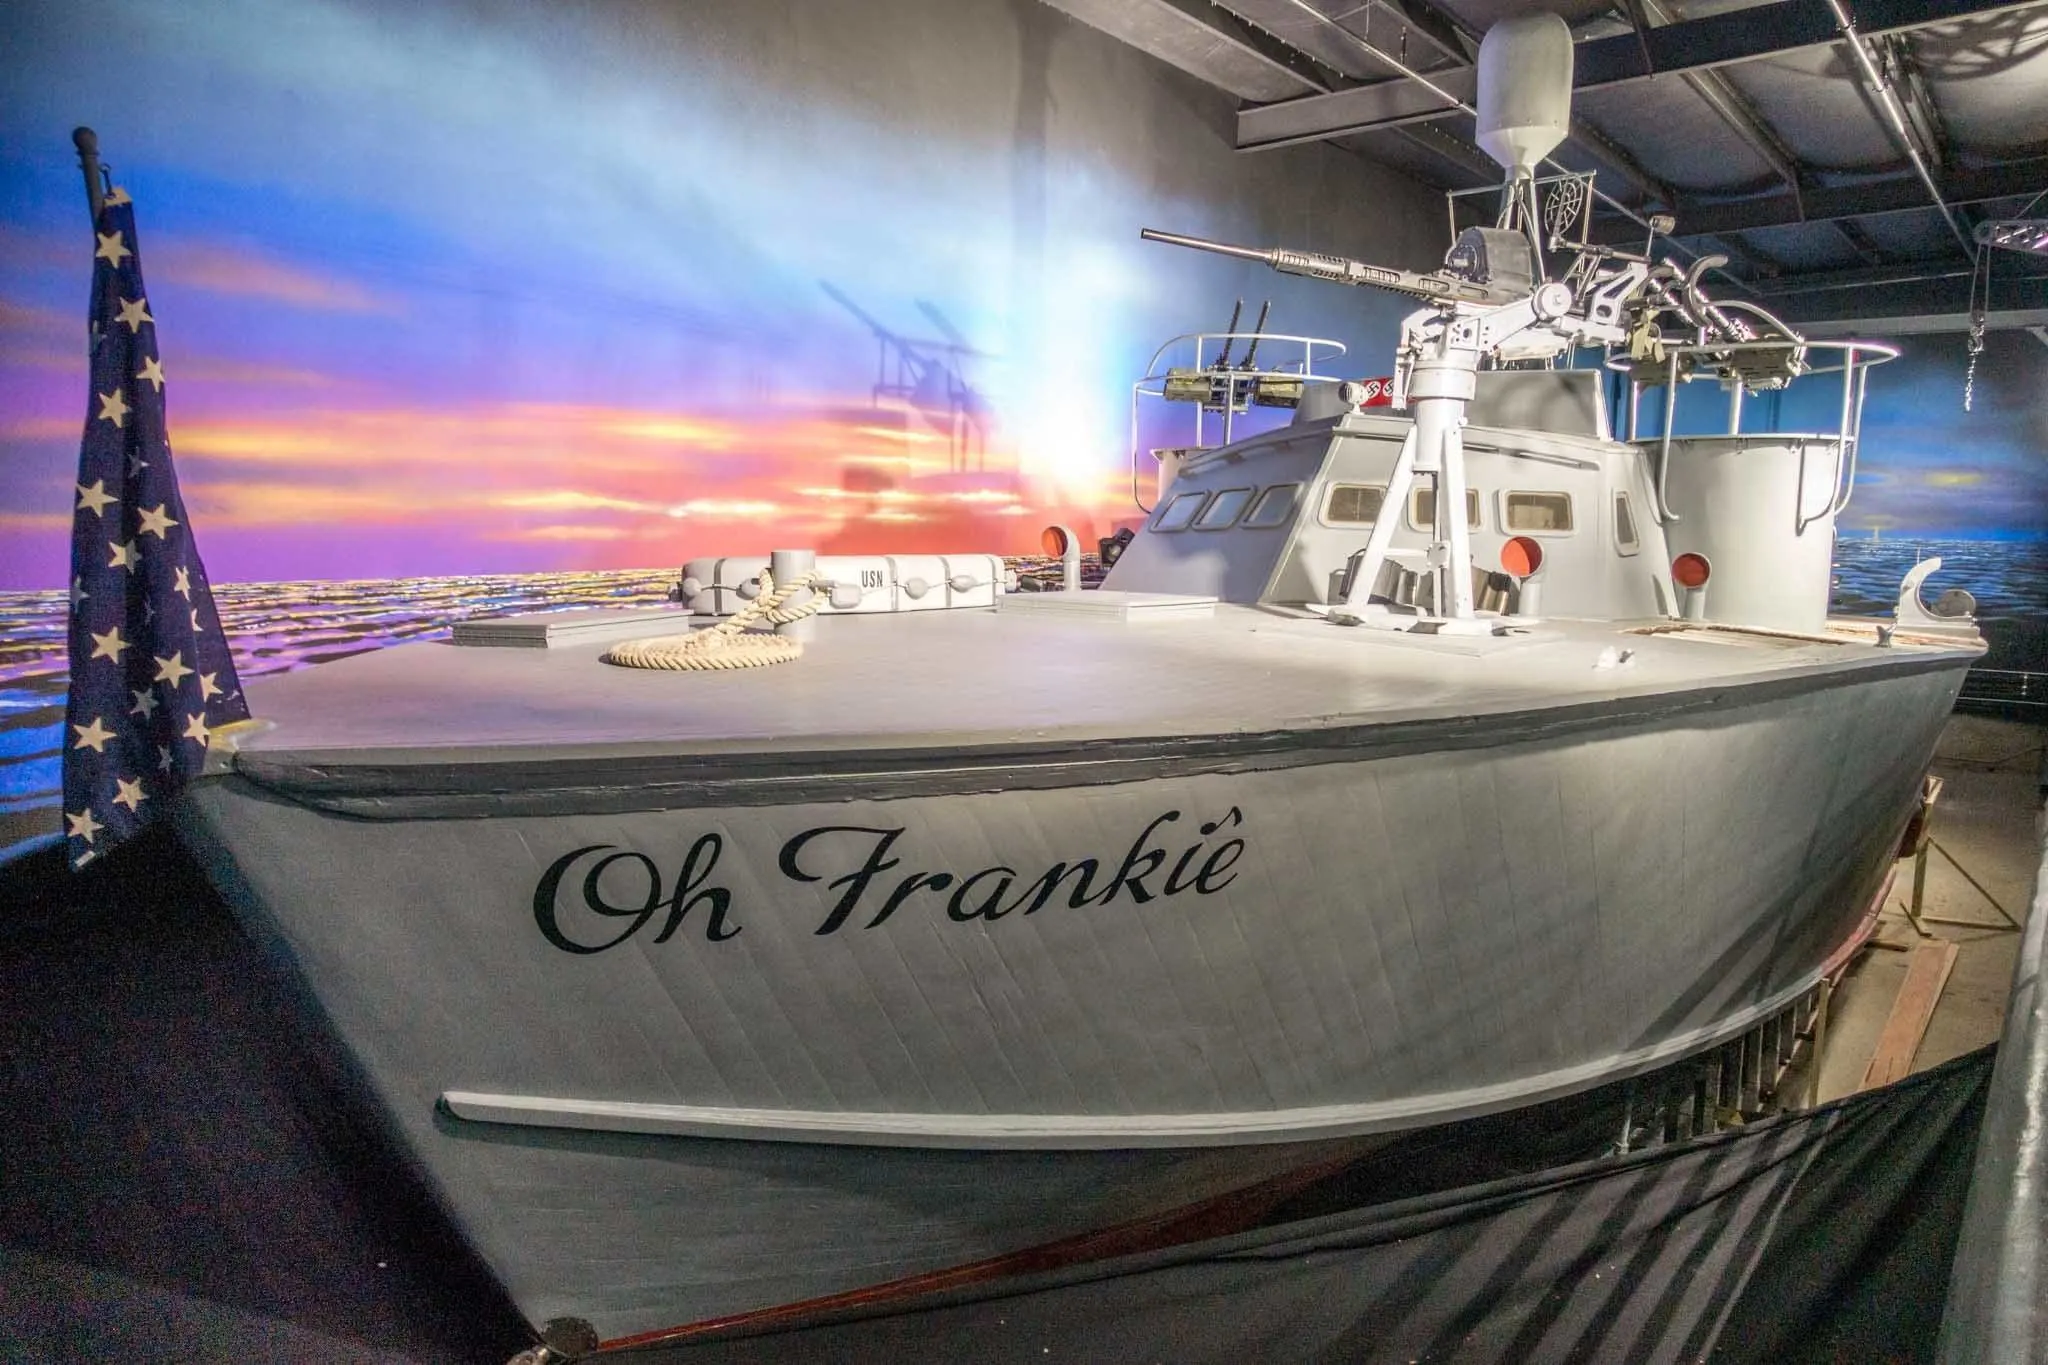 PT-309 boat named Oh Frankie on display at a museum.